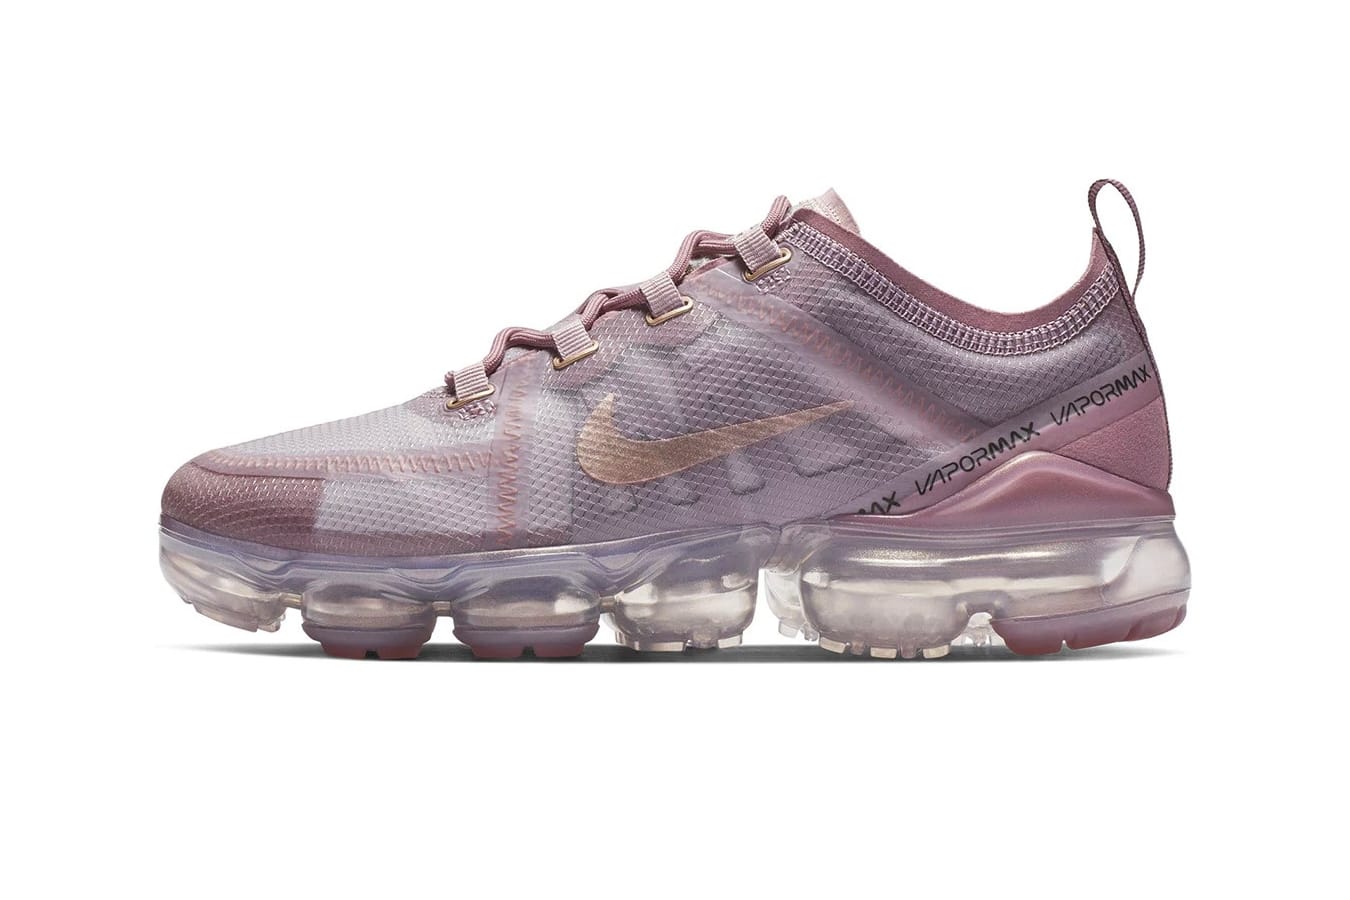 vapormax 2019 by you